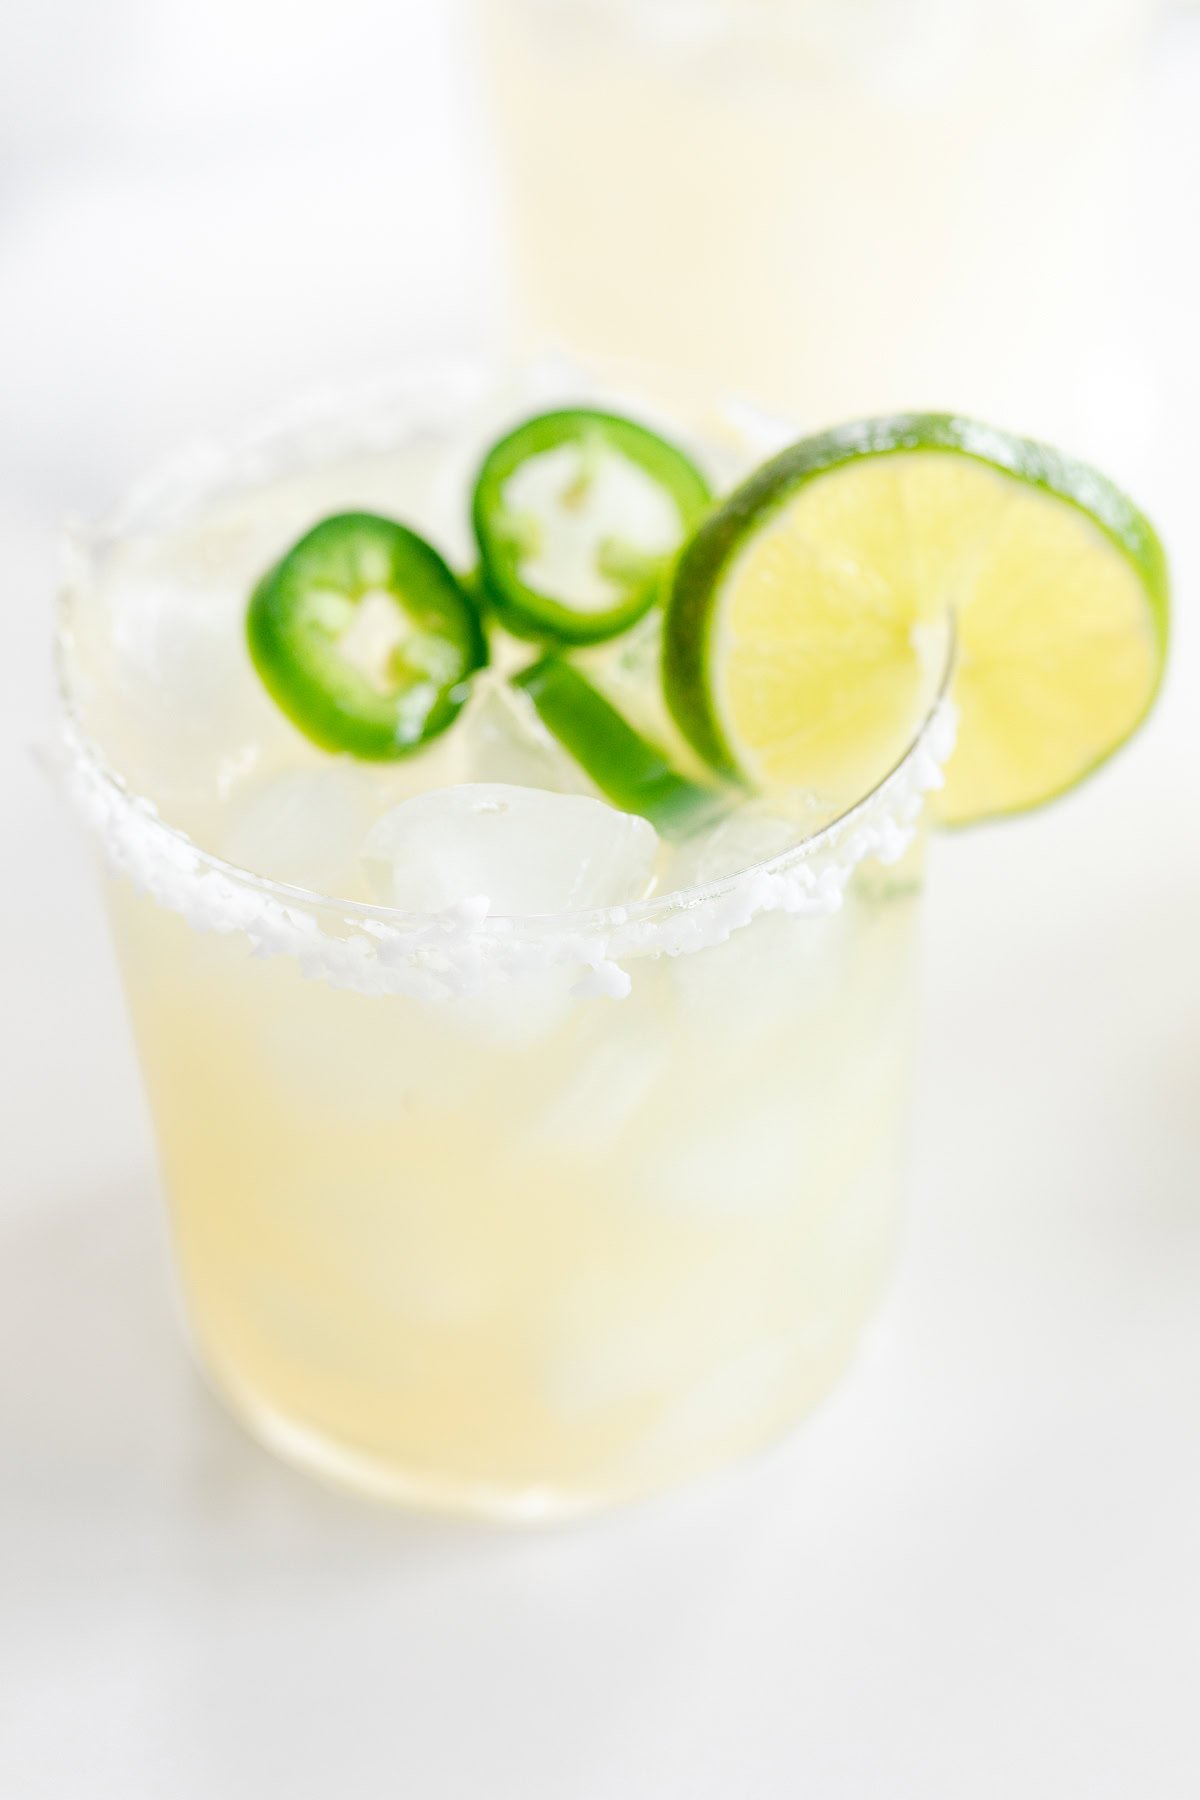 Two glasses of a spicy margarita recipe with salt rims, garnished with lime slices and jalapeño, on a white background.